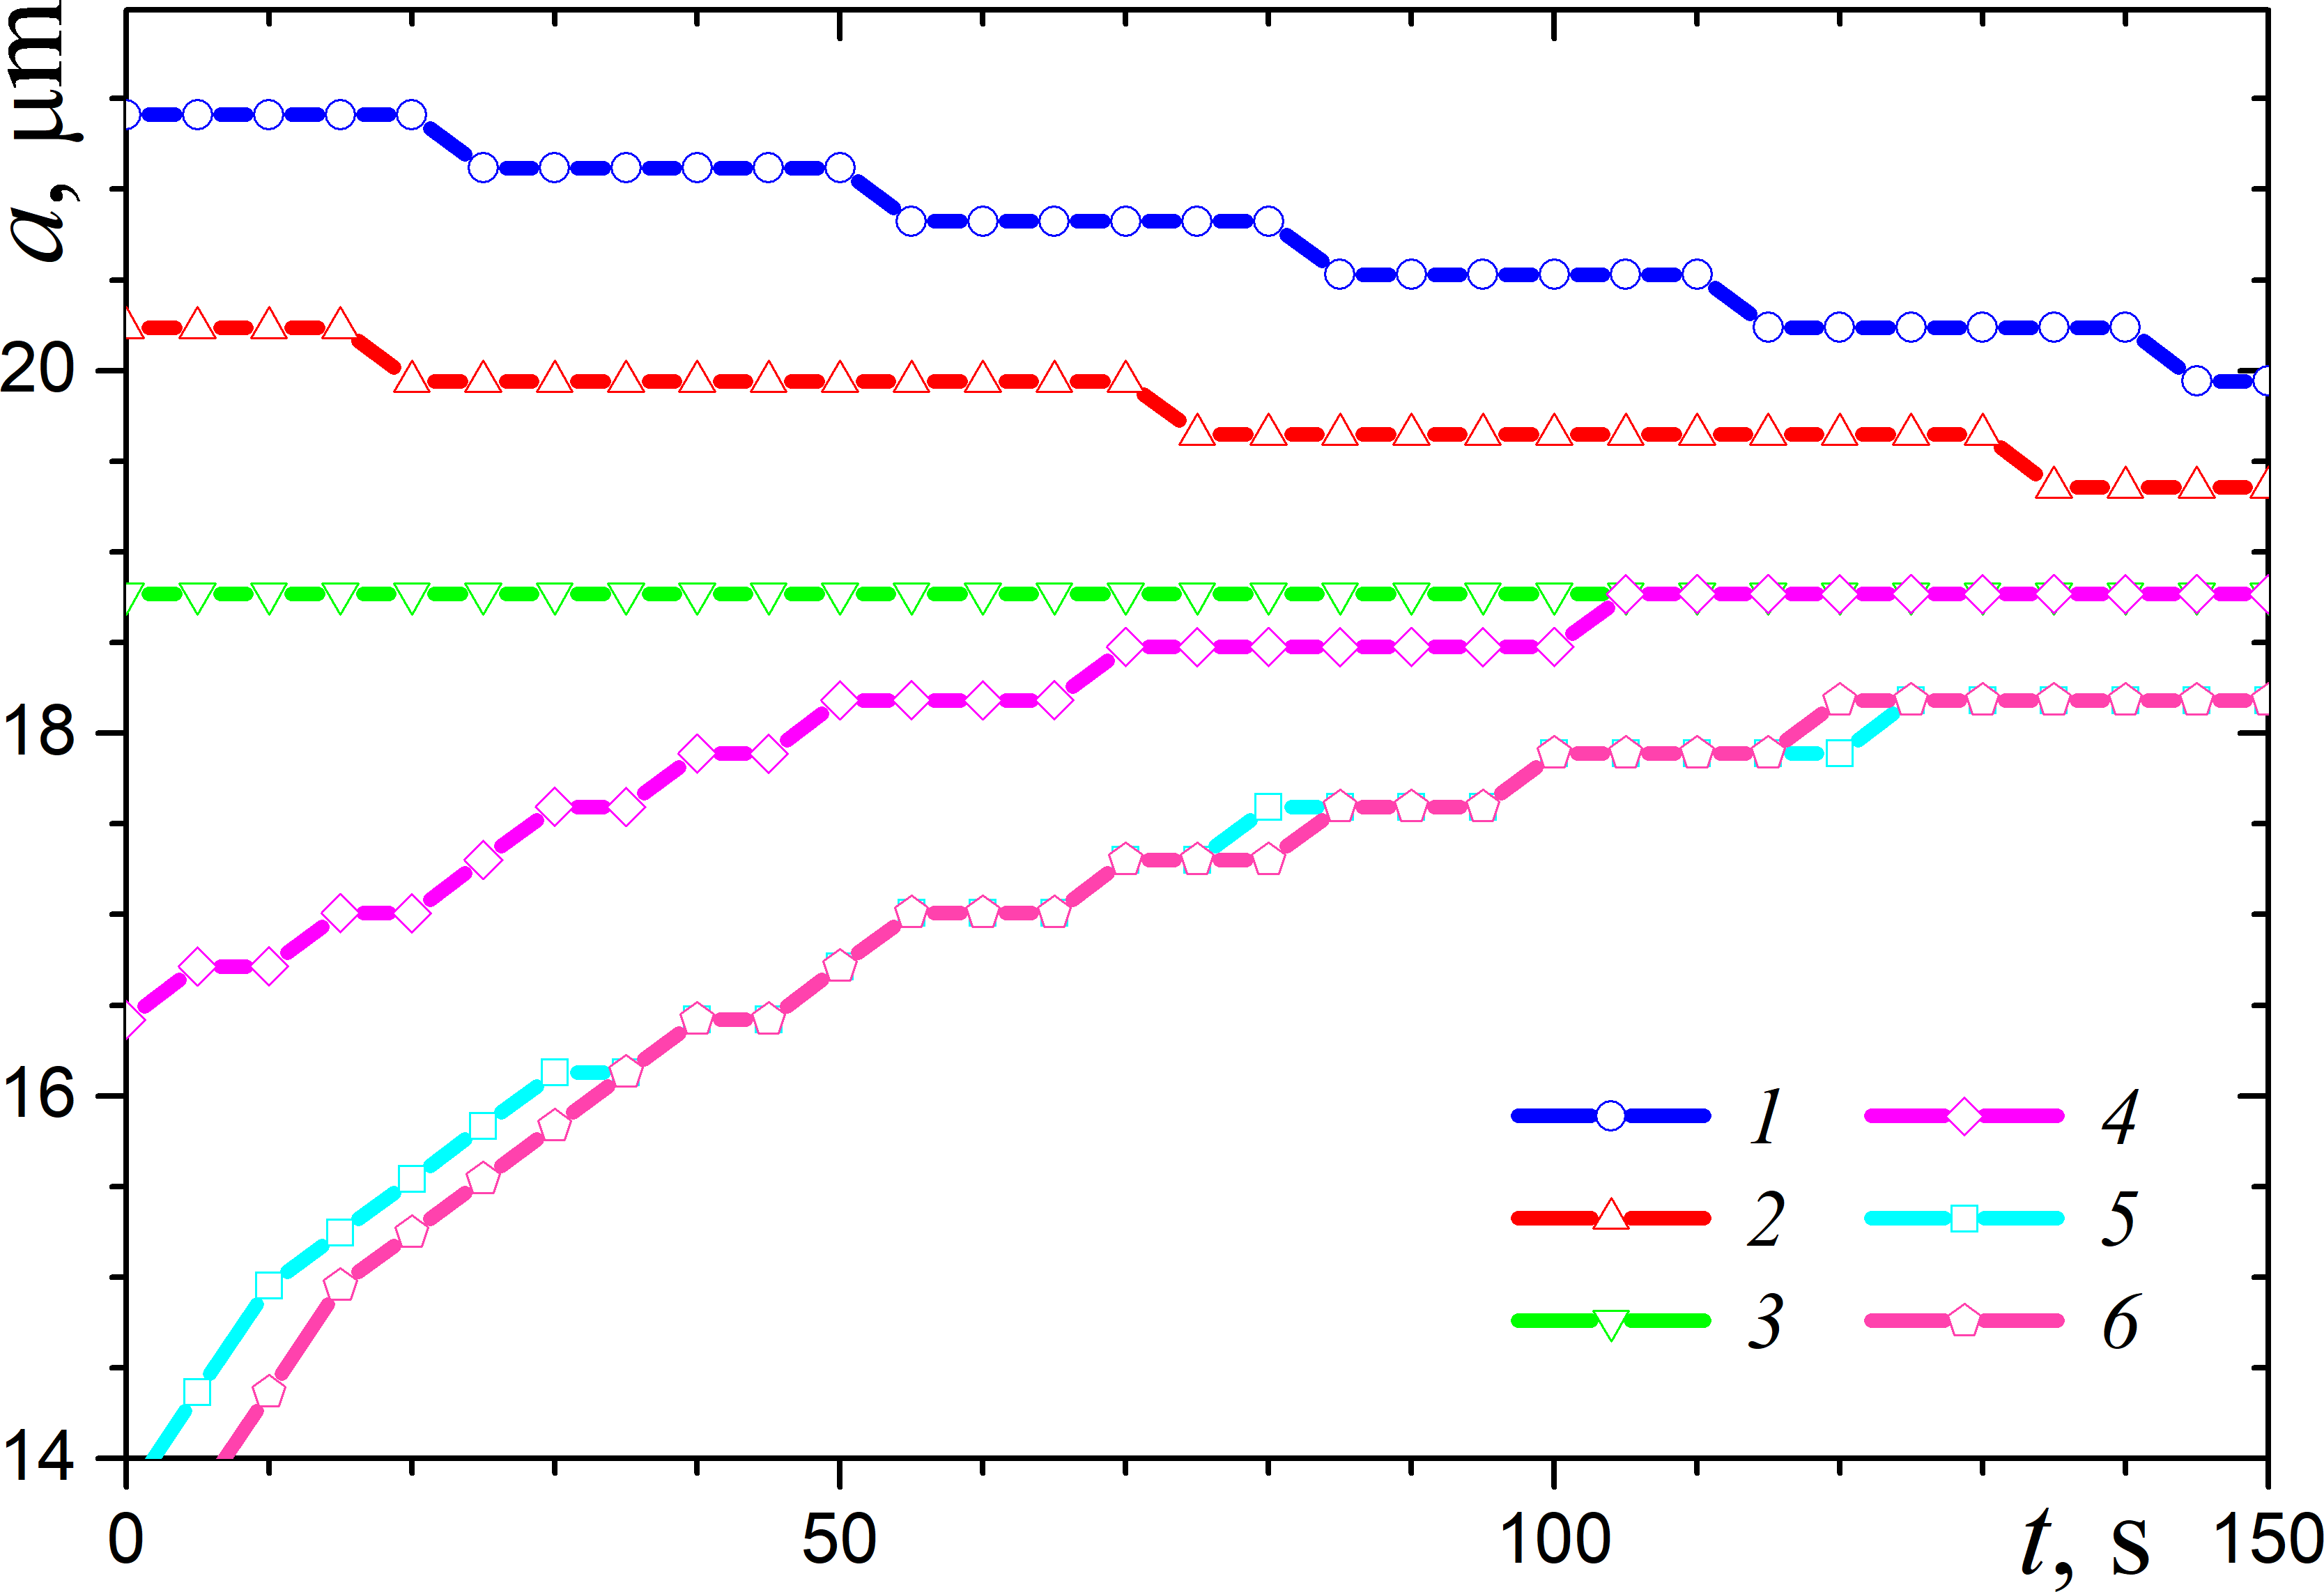 Time variation of radius of water droplets with numbers from 1 to 6 (see Fig. 3); the stepwise nature of the curves is a result of an insufficiently high resolution of the digital image (Reprinted from Dombrovsky et al. with permission from Elsevier, Copyright 2020).